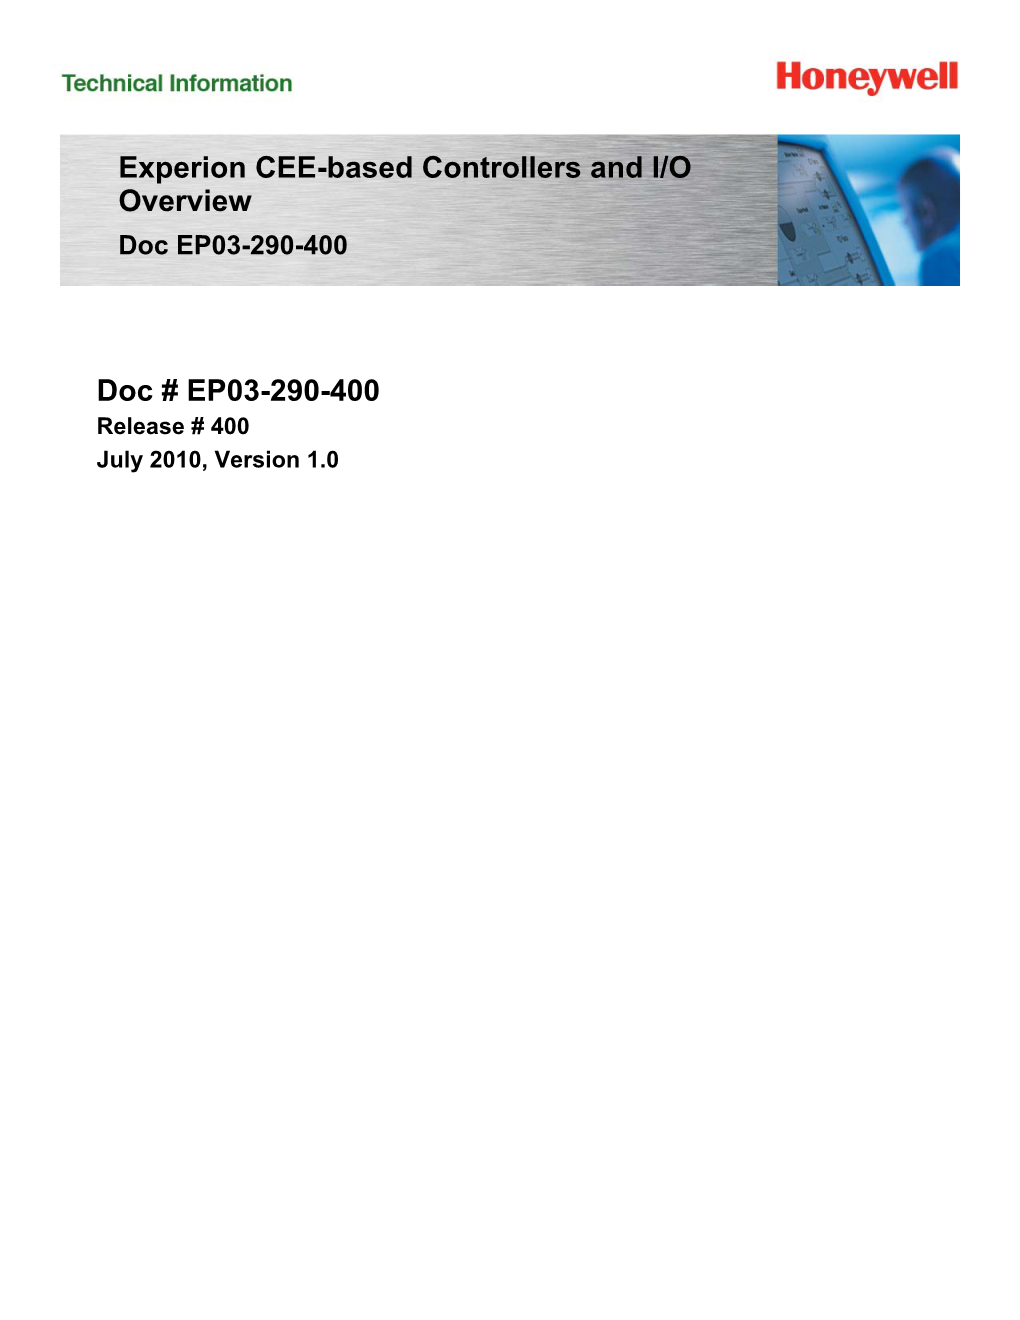 Experion CEE-Based Controllers and I/O Overview Doc EP03-290-400